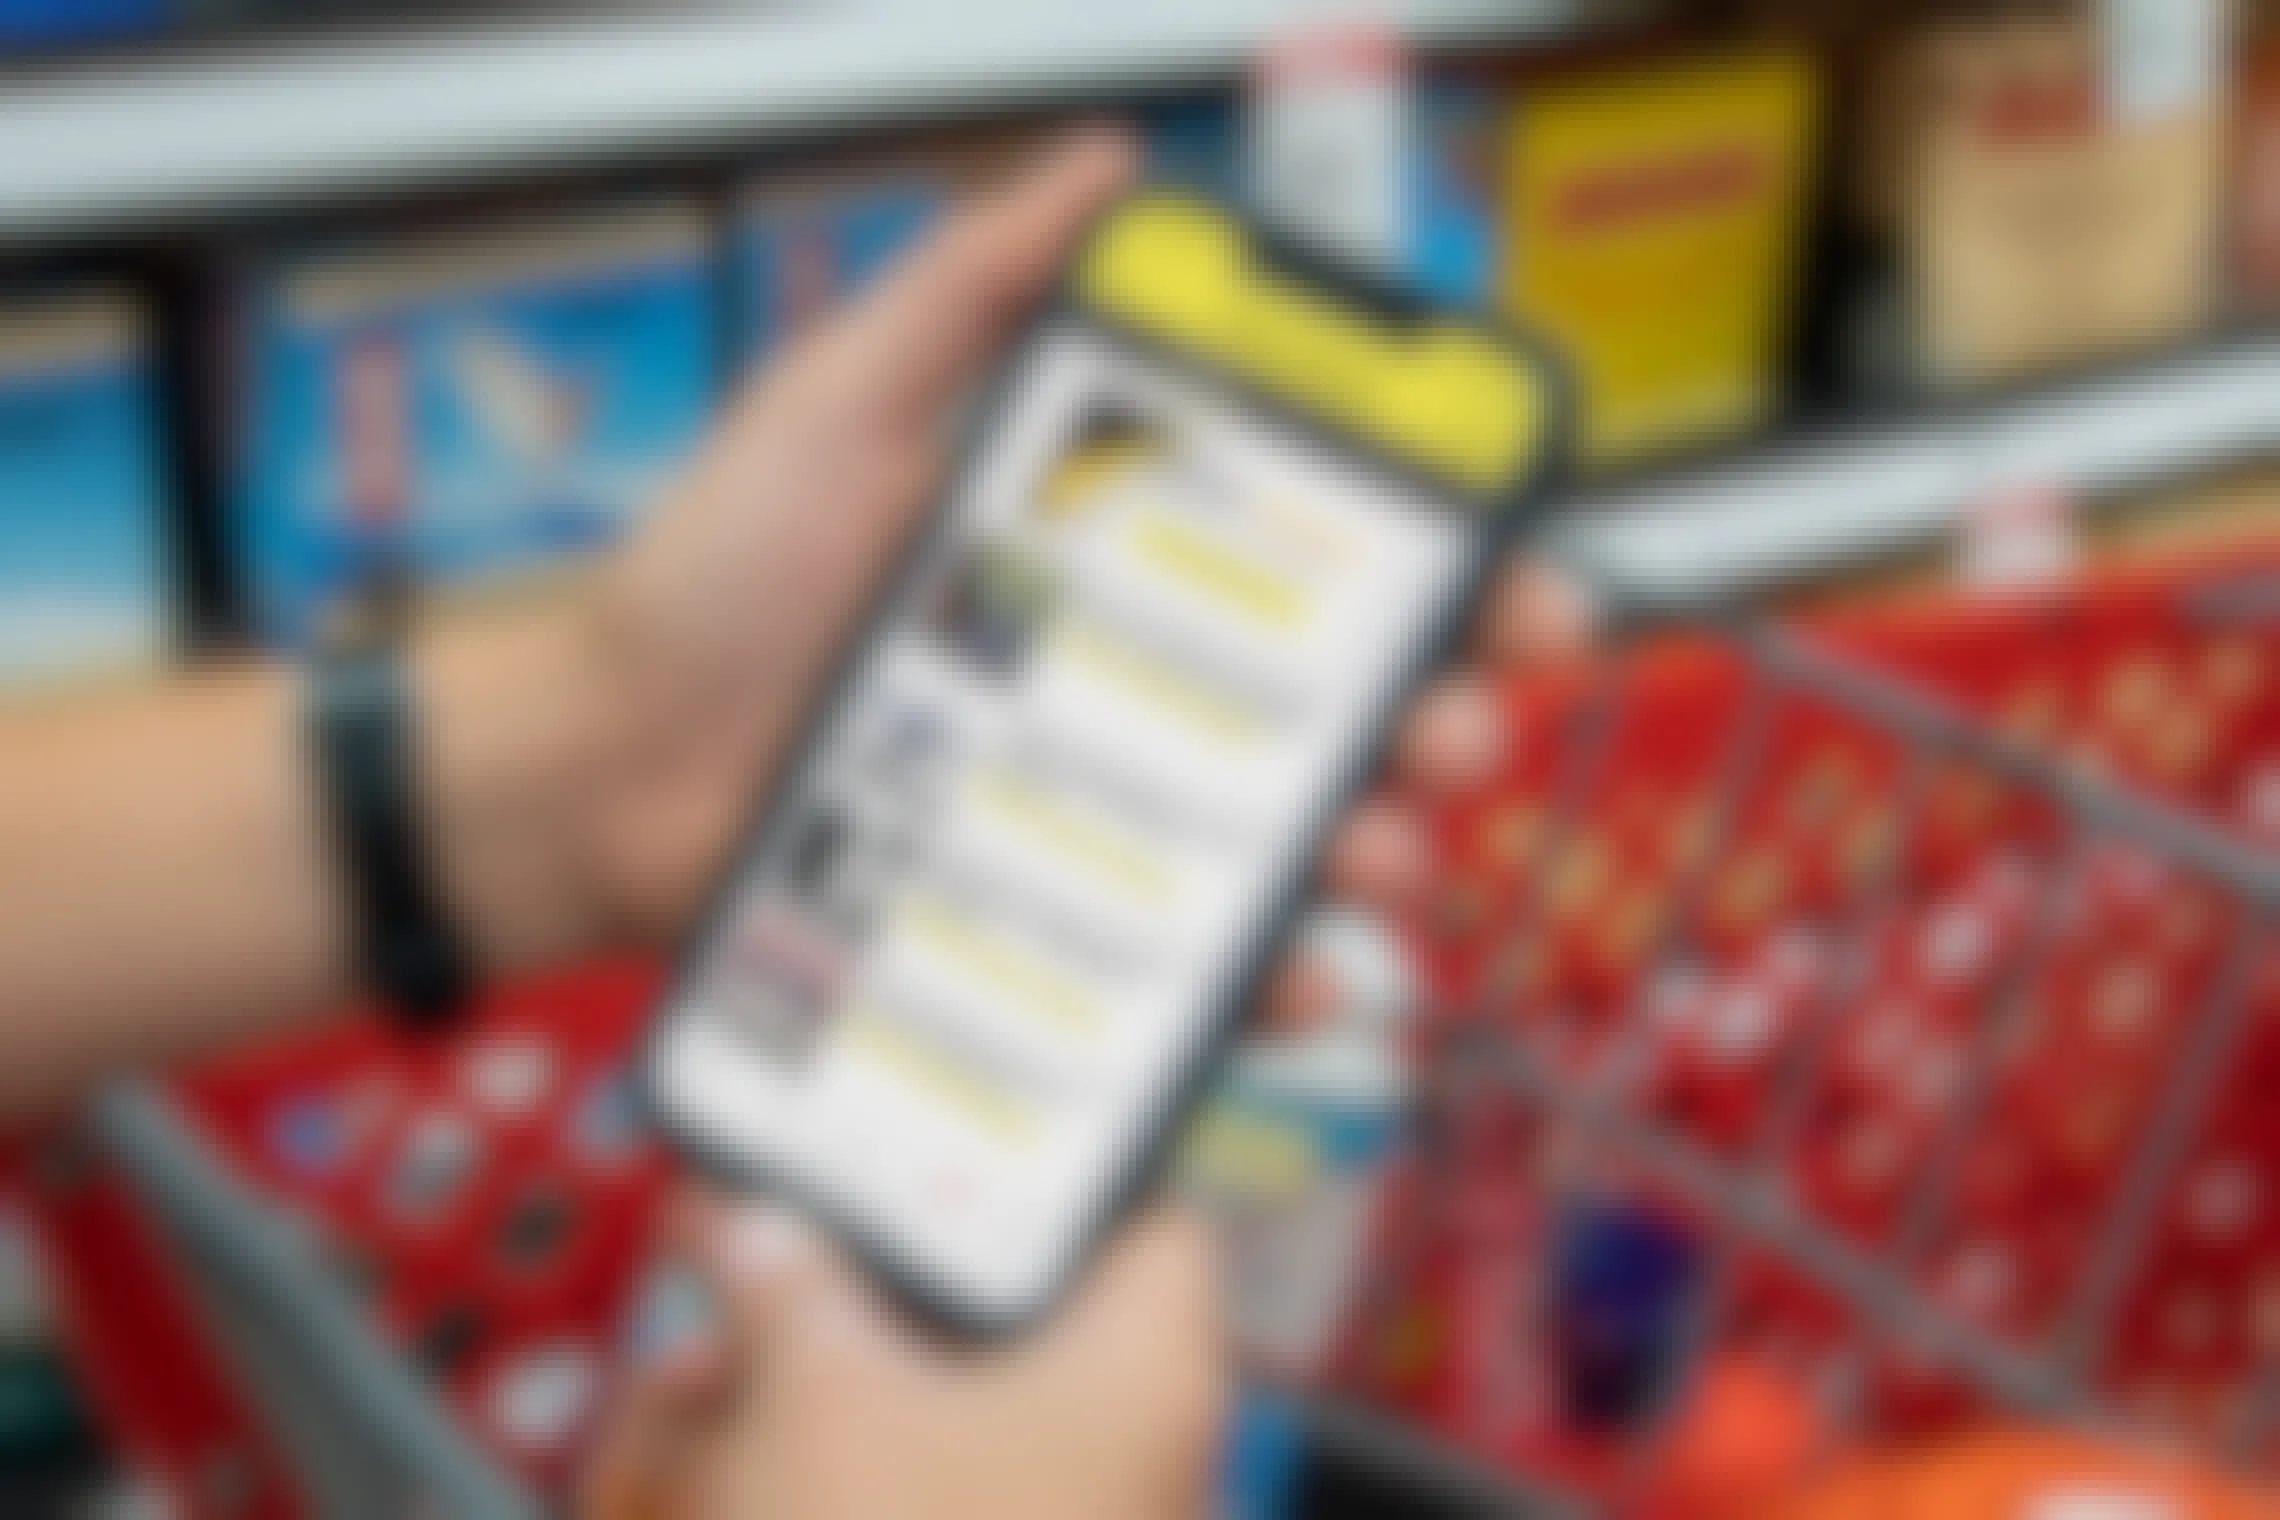 A person's hands resting on a shopping cart, holding a cell phone displaying the KCL app's Black Friday deals.